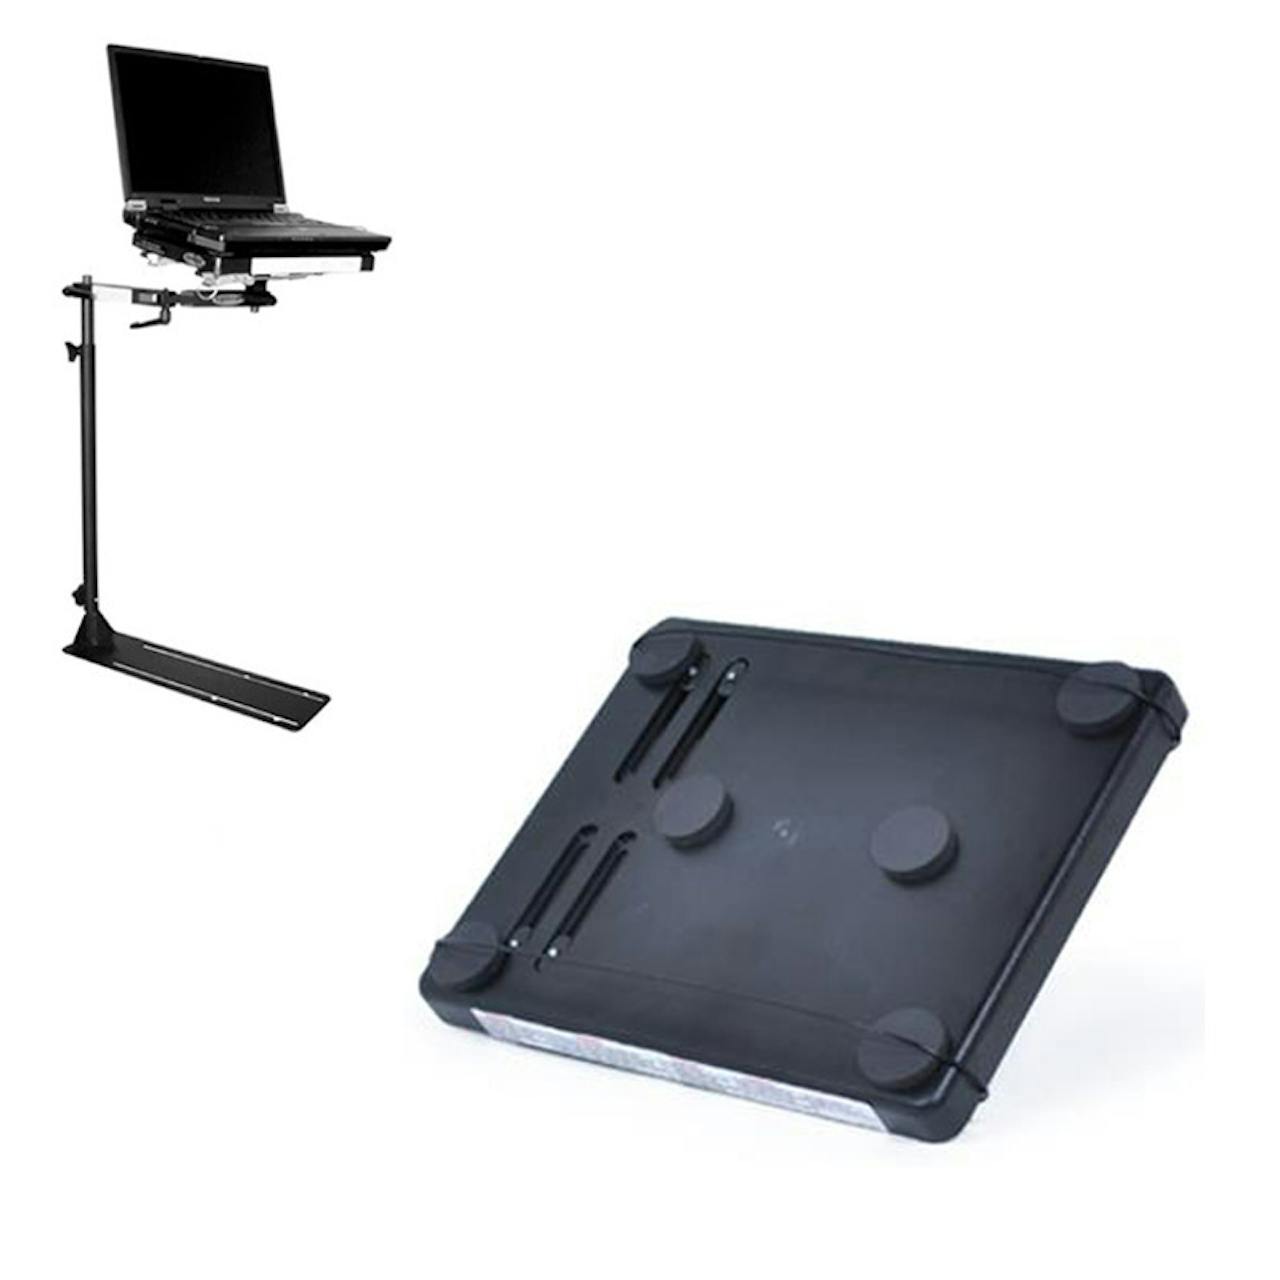 https://raneys-cdn11.imgix.net/images/stencil/original/products/193853/95584/Universal_Over_The_Road_Truck_Laptop_Mount_With_Cable_Dock_Desktop_11145__97040.1452525536.jpg?auto=compress,format&w=1280